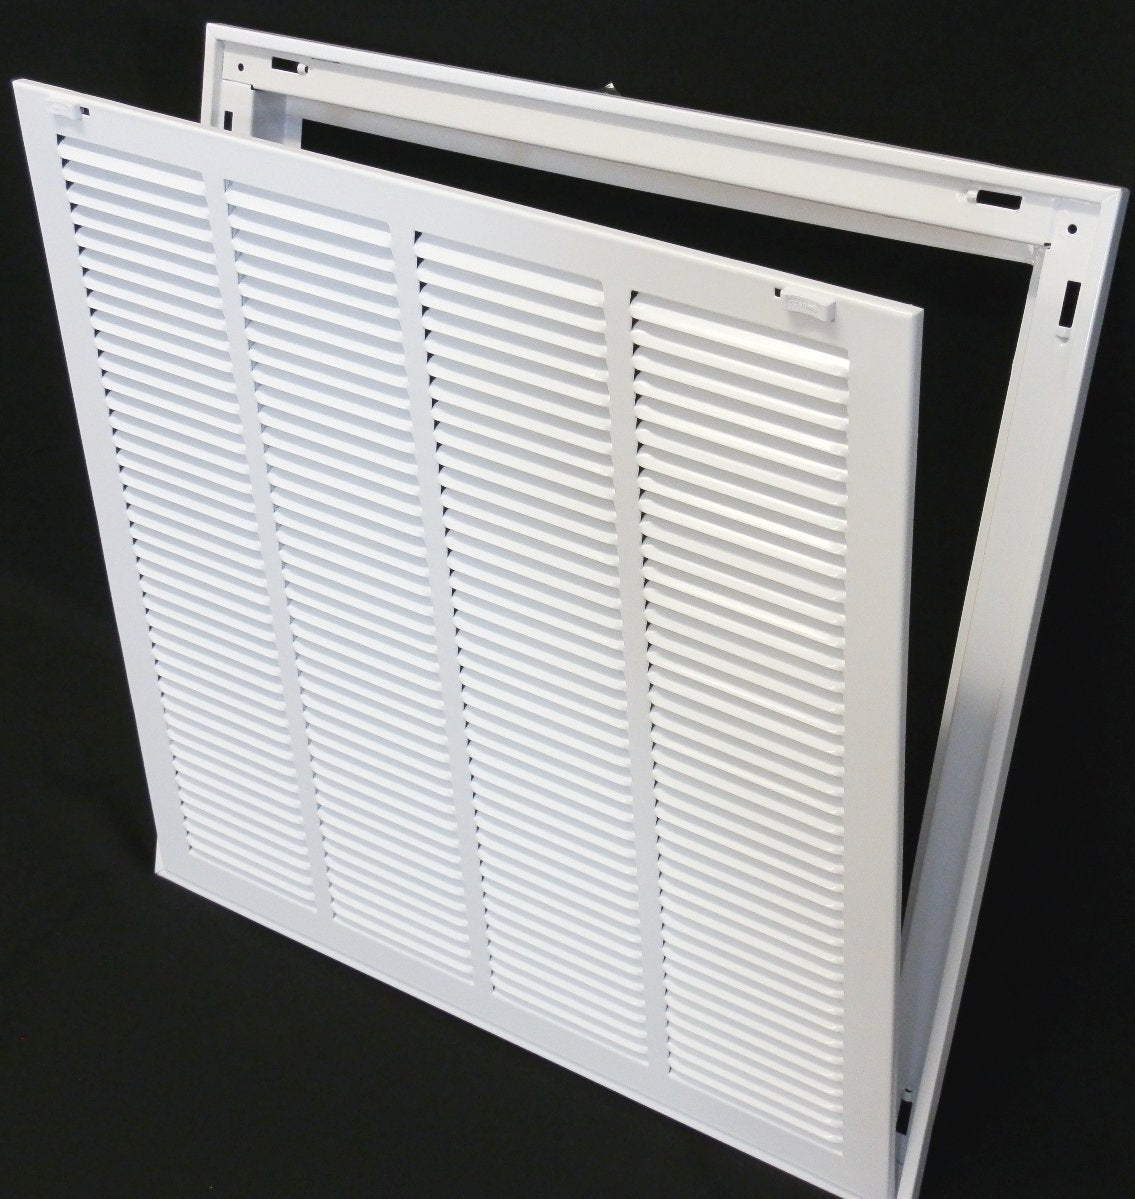 24&quot; X 26&quot; Steel Return Air Filter Grille for 1&quot; Filter - Removable Frame - [Outer Dimensions: 26 5/8&quot; X 28 5/8&quot;]